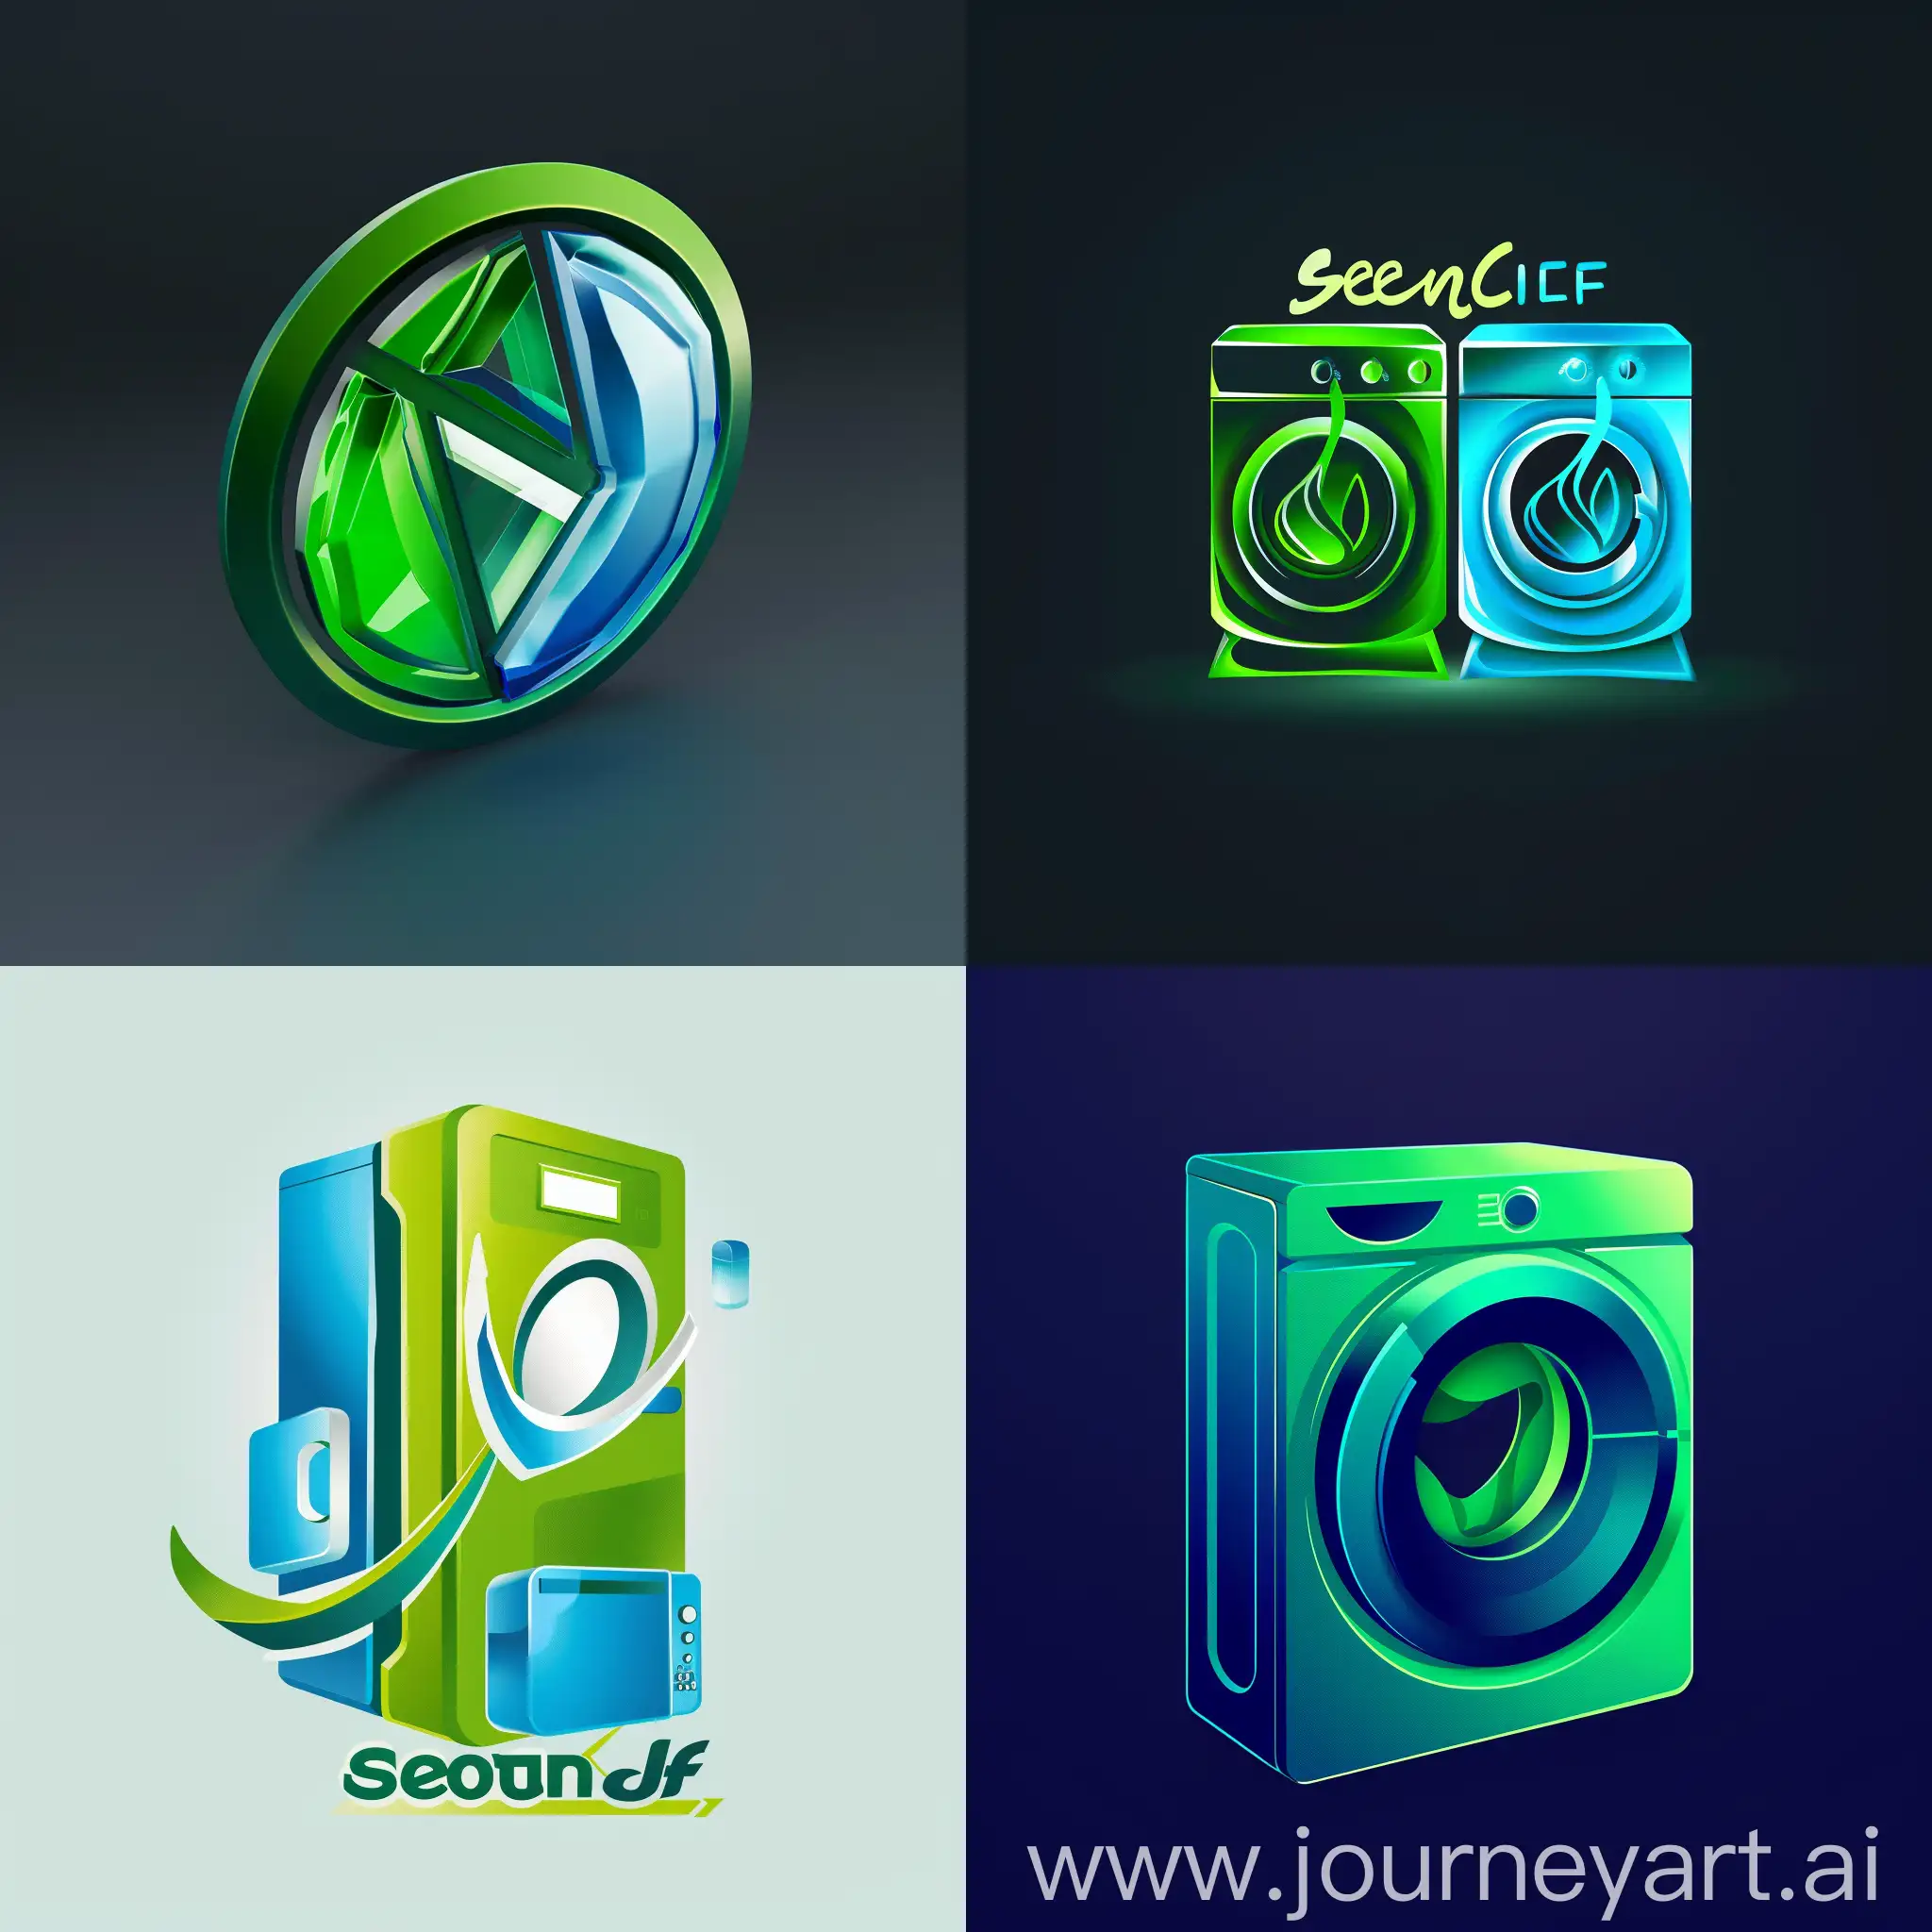 Innovative-Second-Life-Appliance-Logos-in-Vibrant-Green-and-Blue